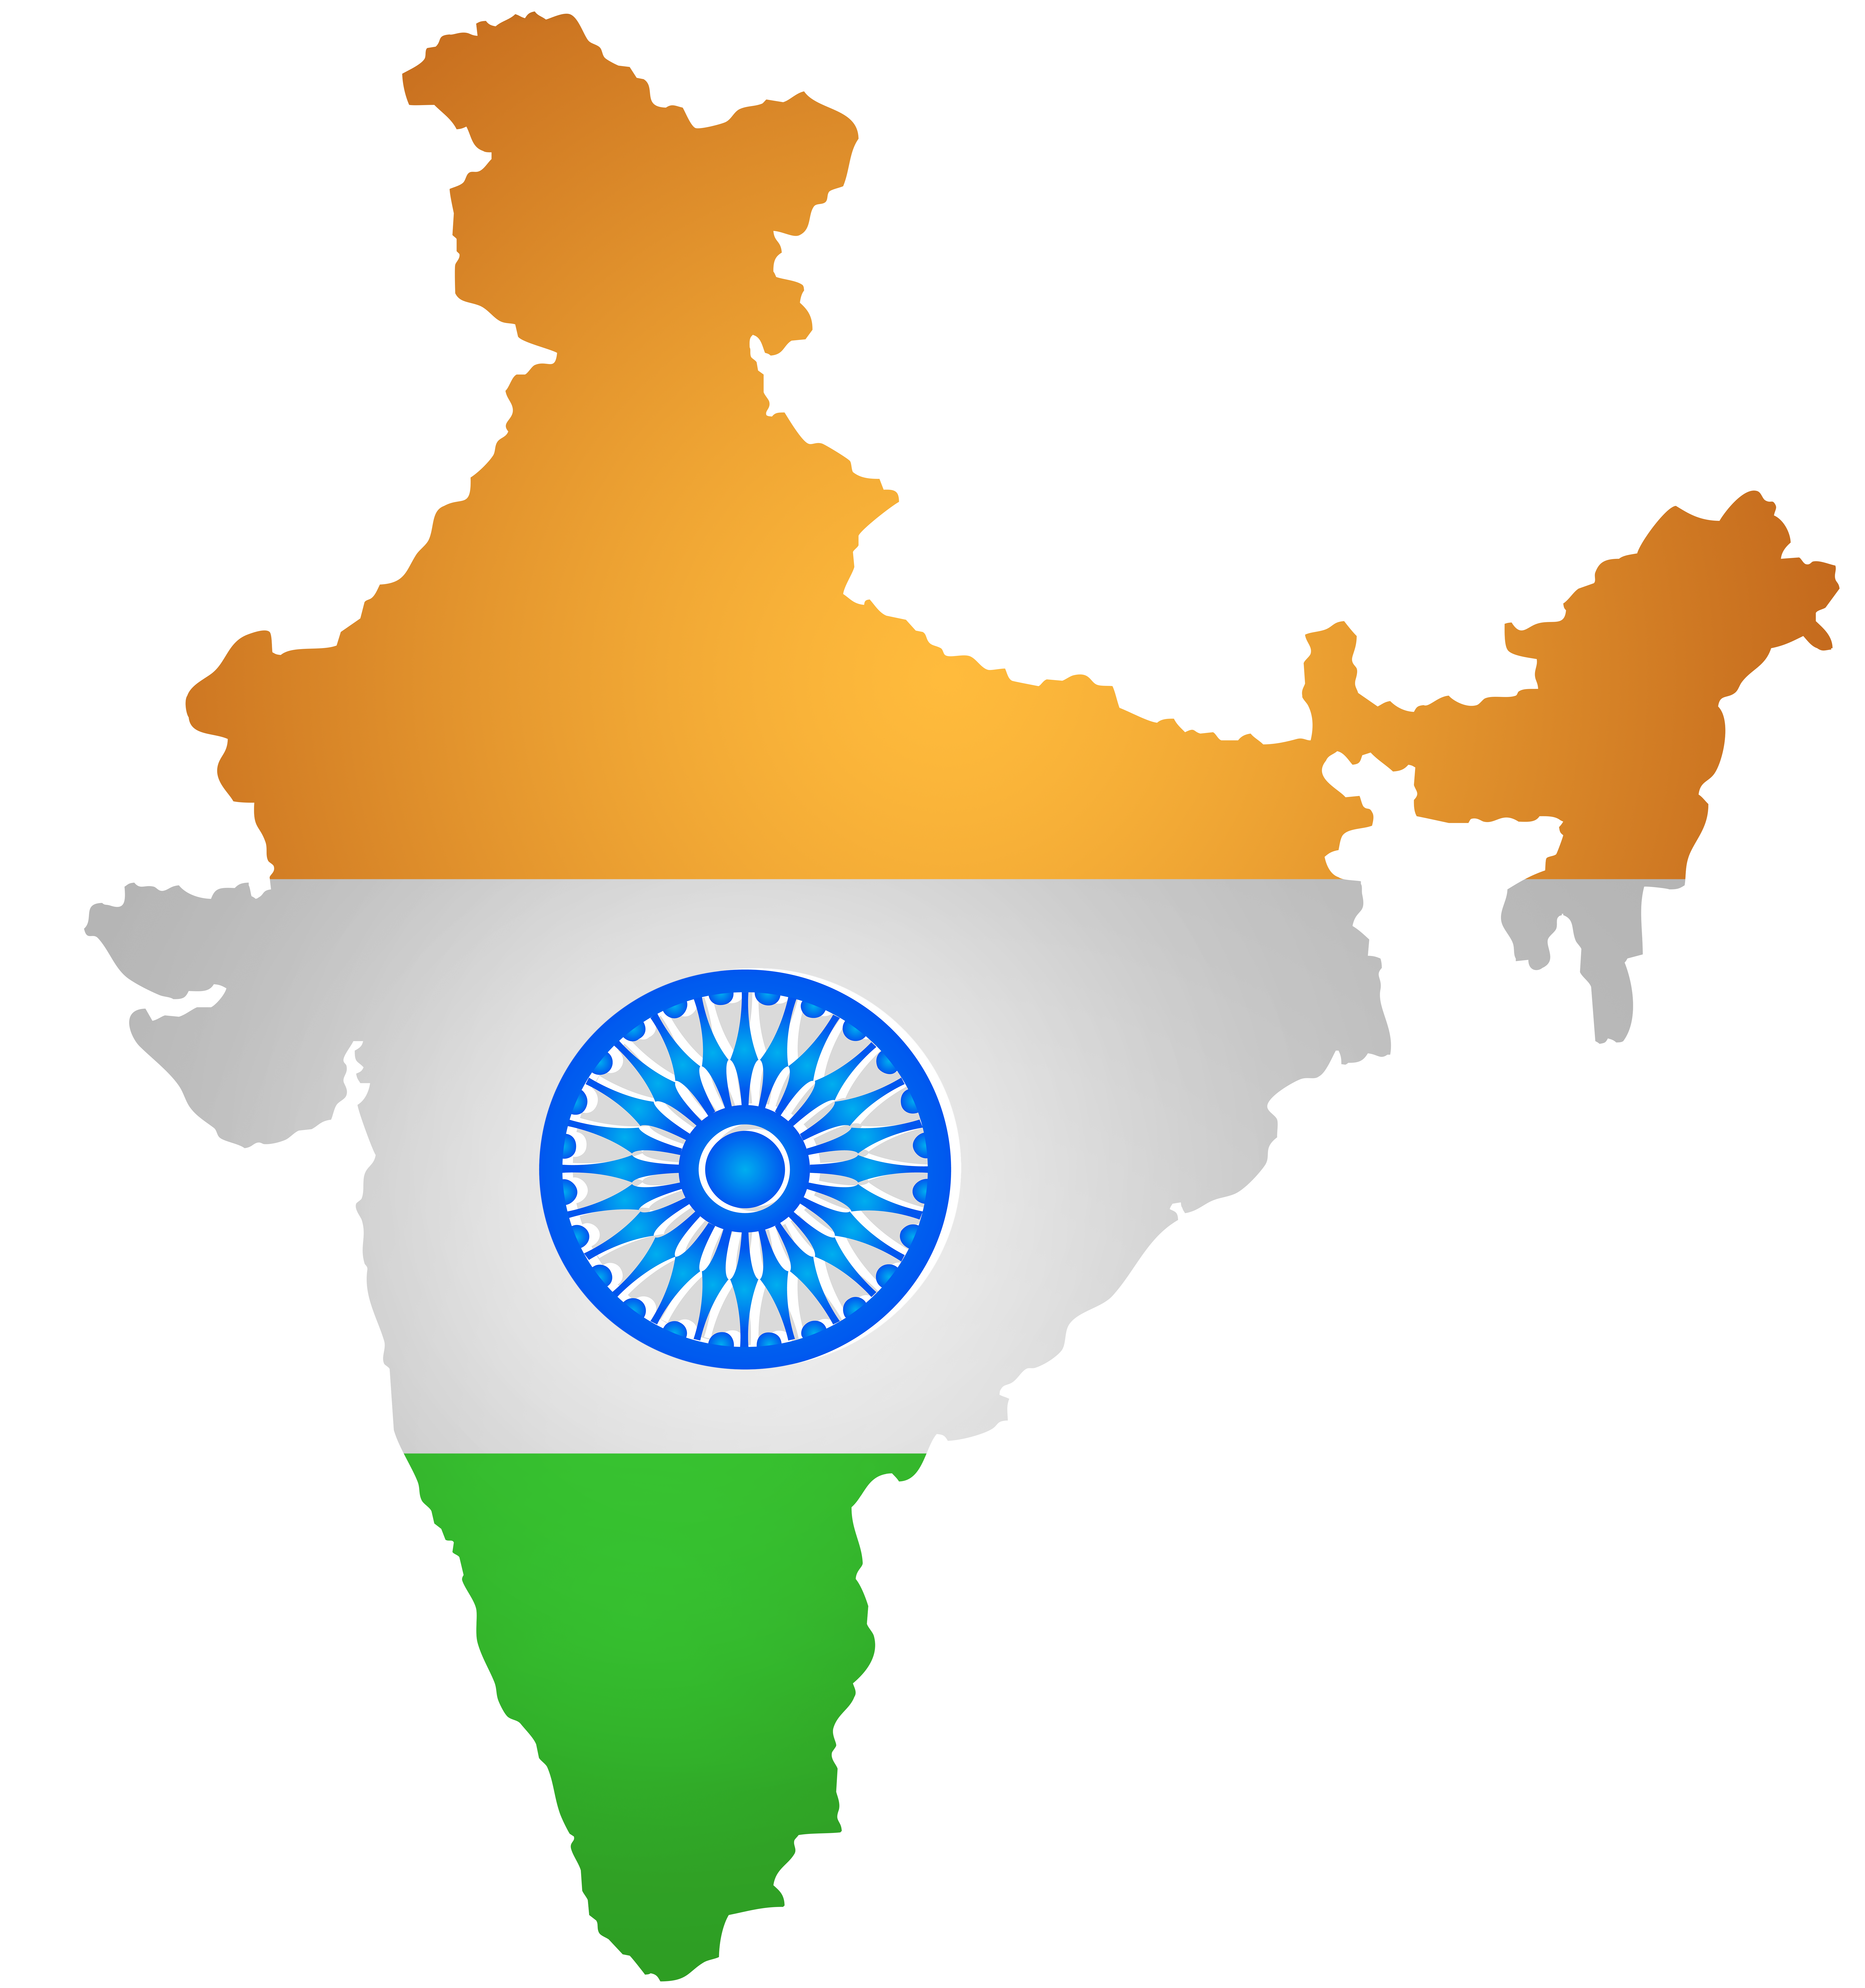 clipart map map india